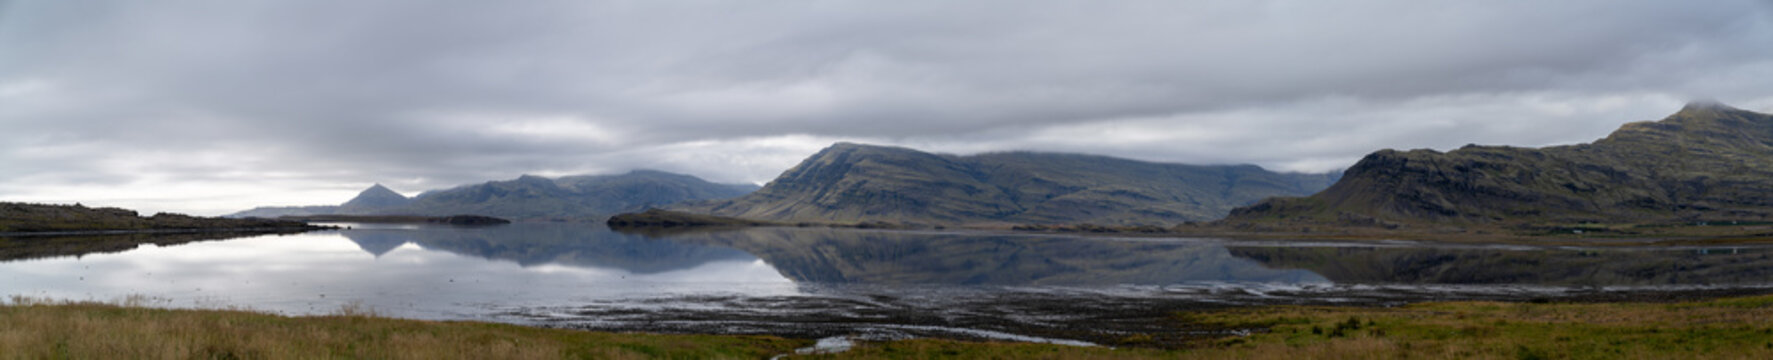 Panorama of the sea and mountains, a typical landscape in Iceland.